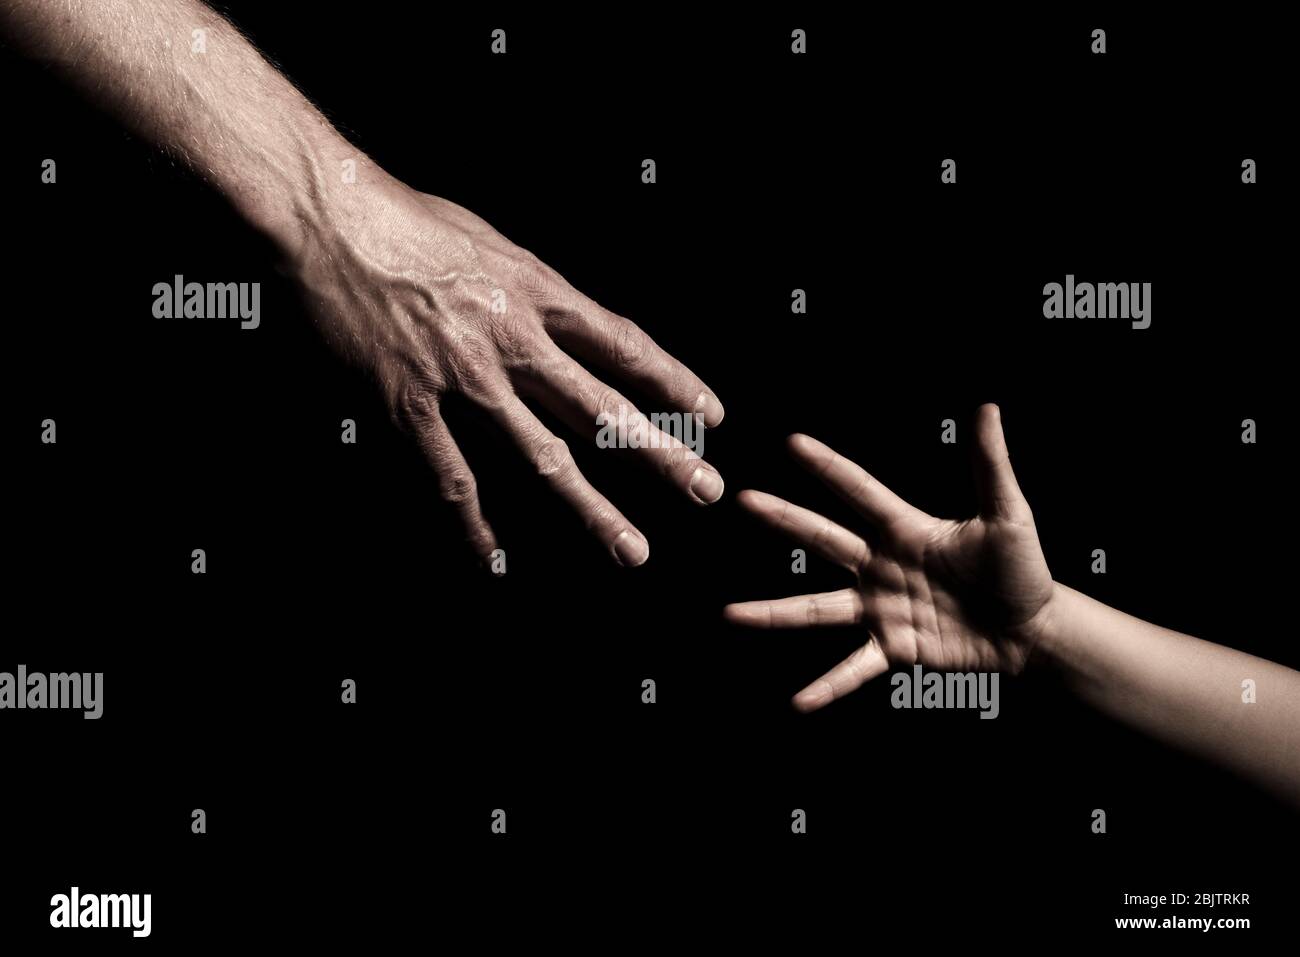 Hands reaching out to each other on dark black background Stock Photo